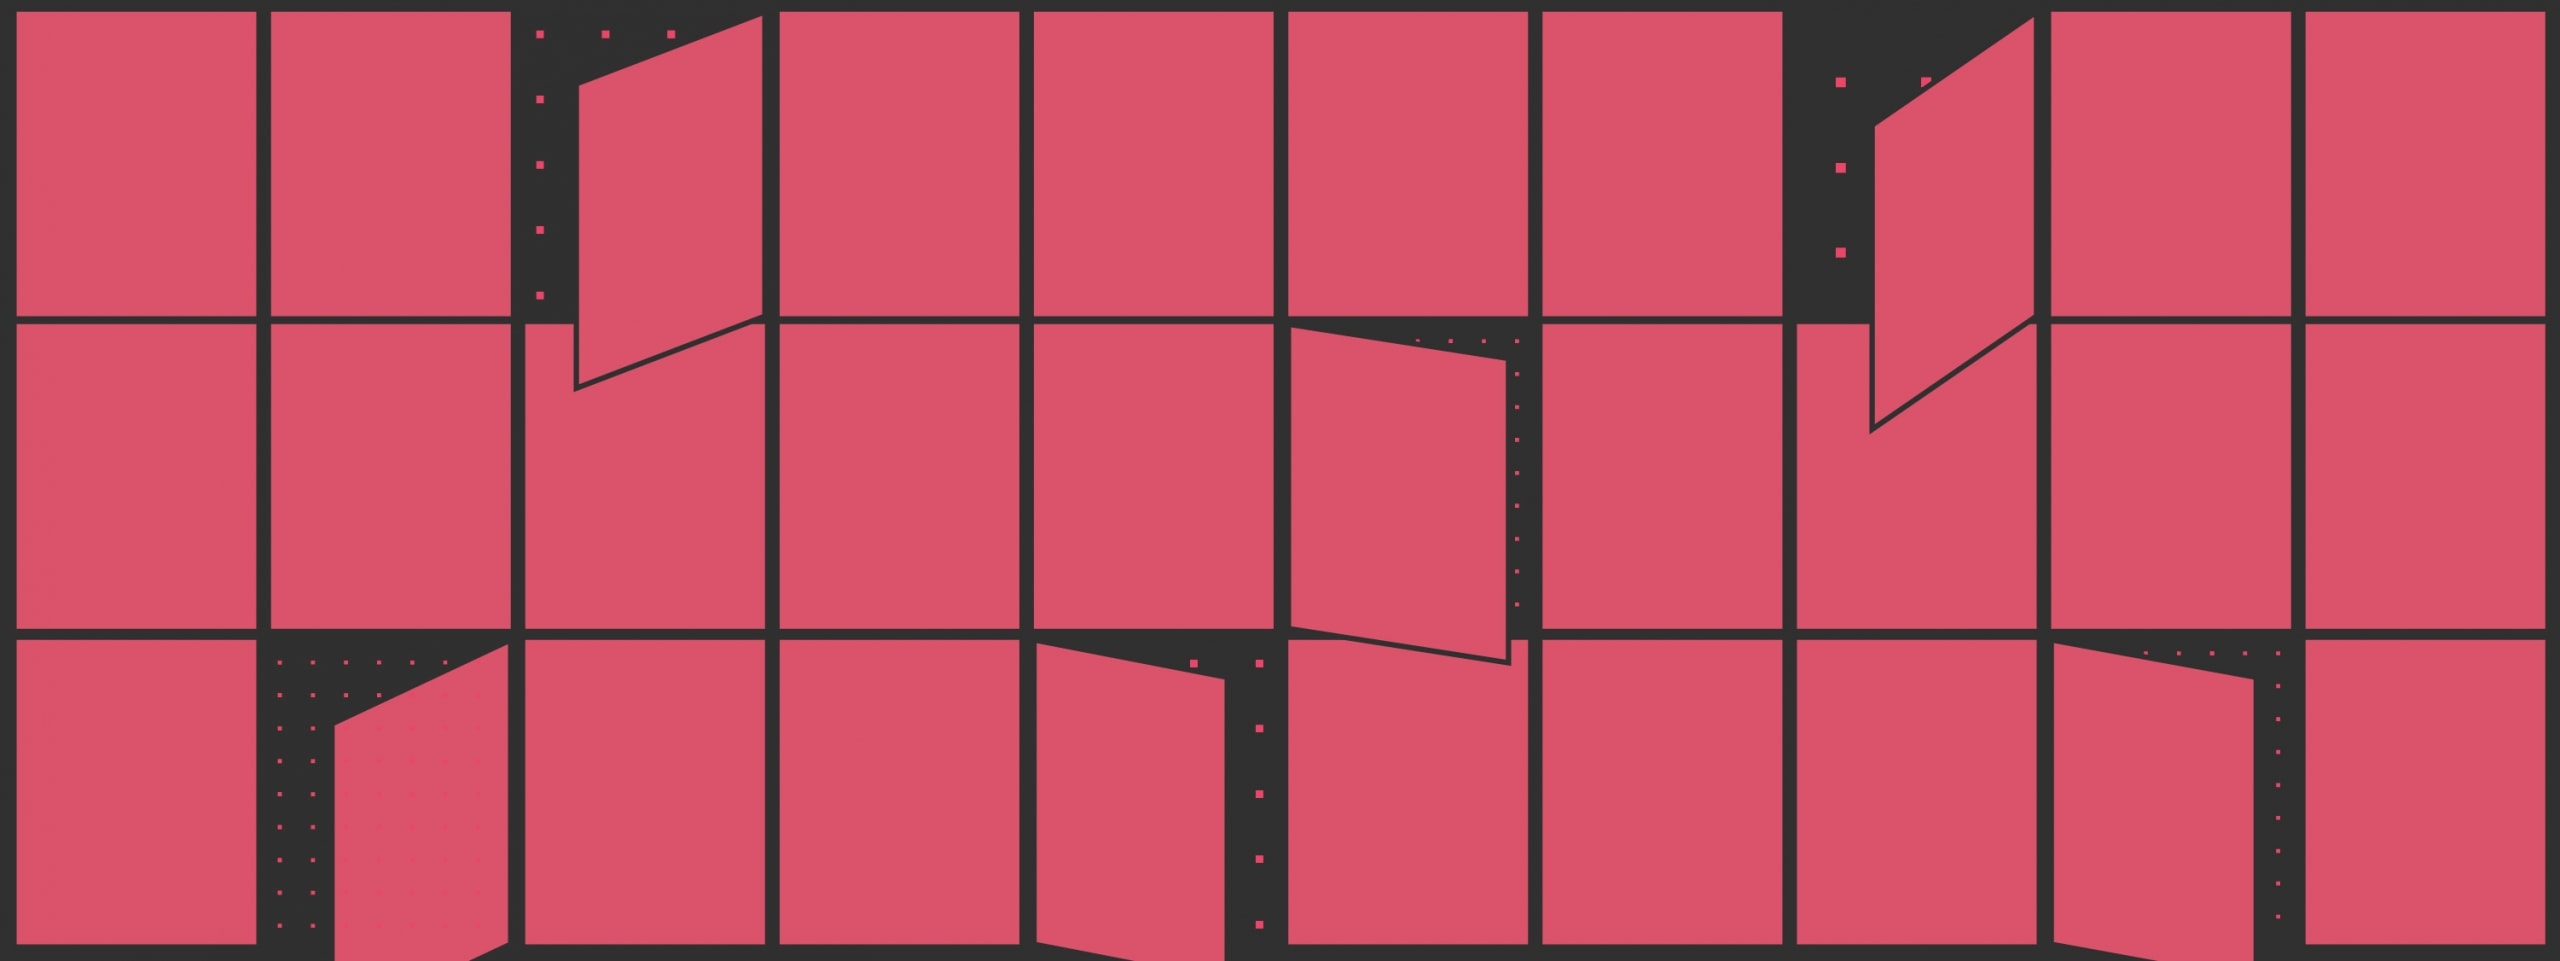 Graphic design with red rectangles on black background